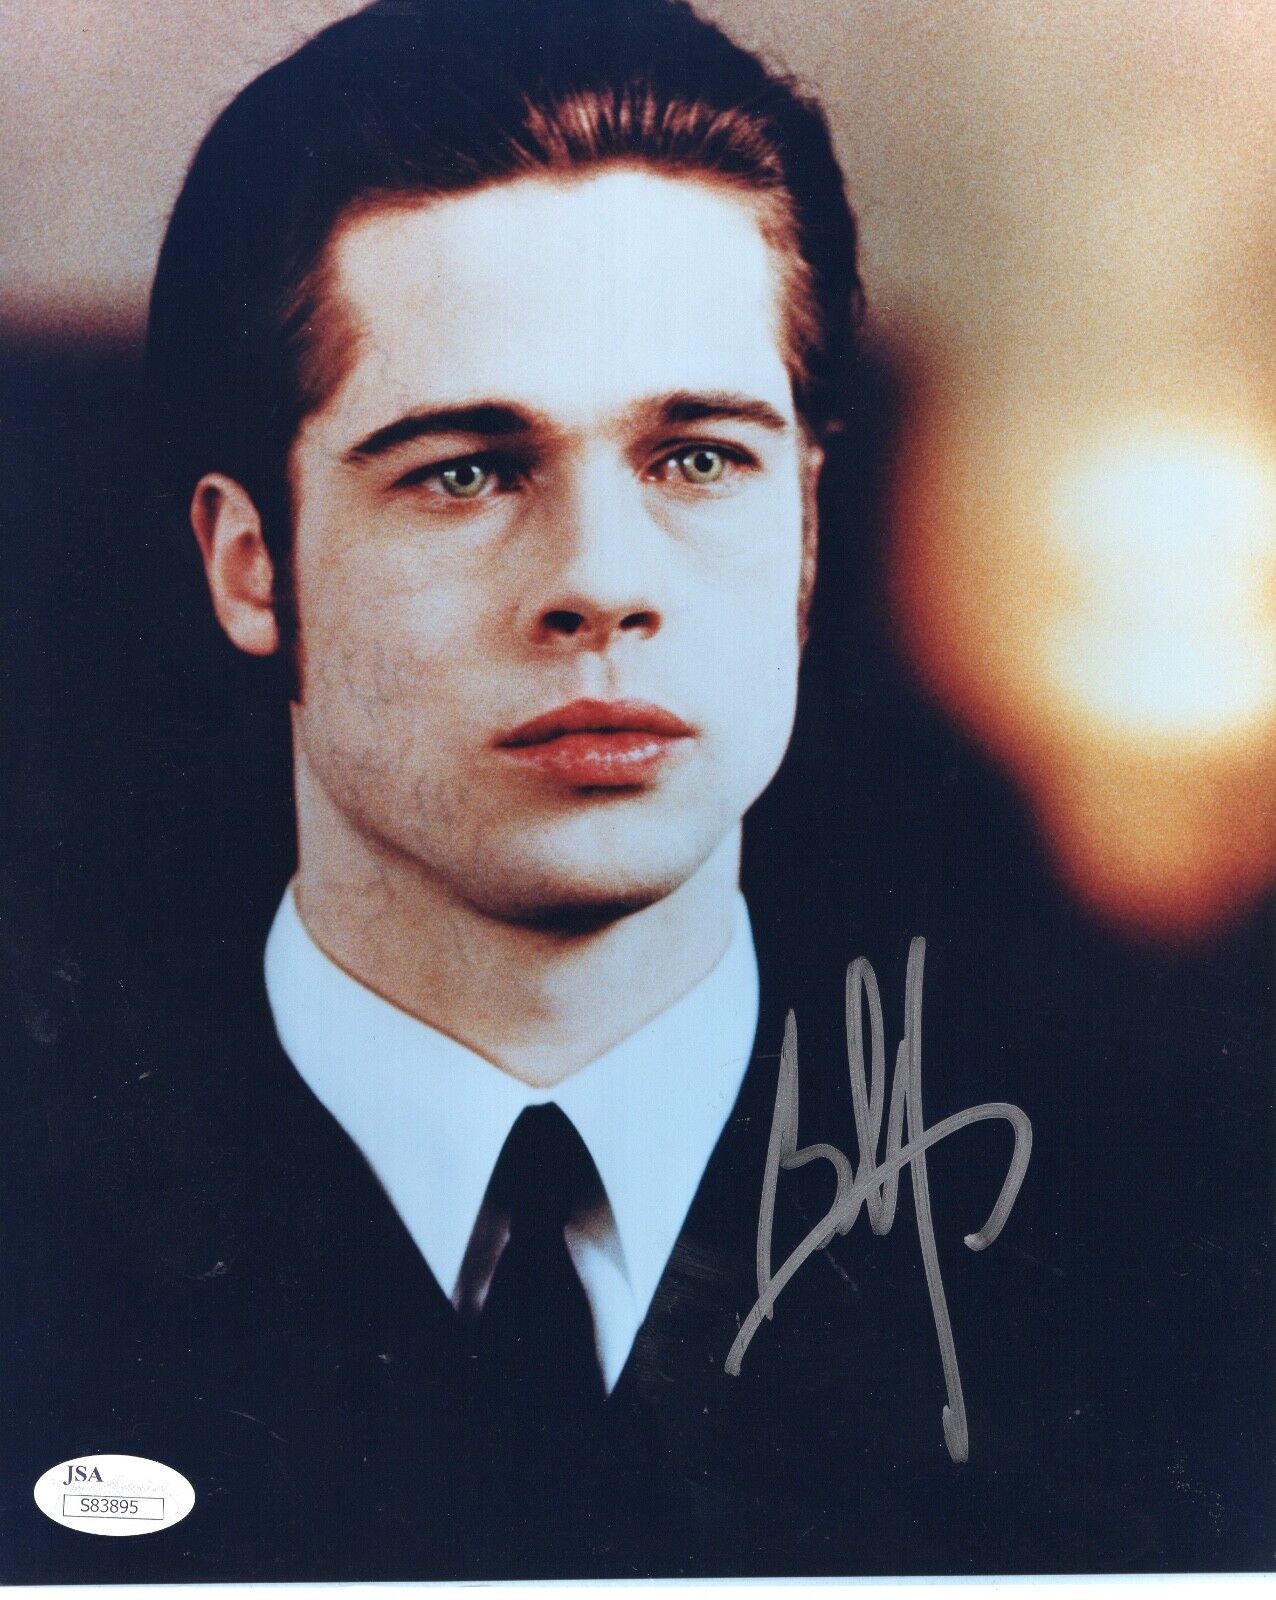 BRAD PITT HAND SIGNED 8x10 COLOR PHOTO         INTERVIEW WITH VAMPIRE       JSA